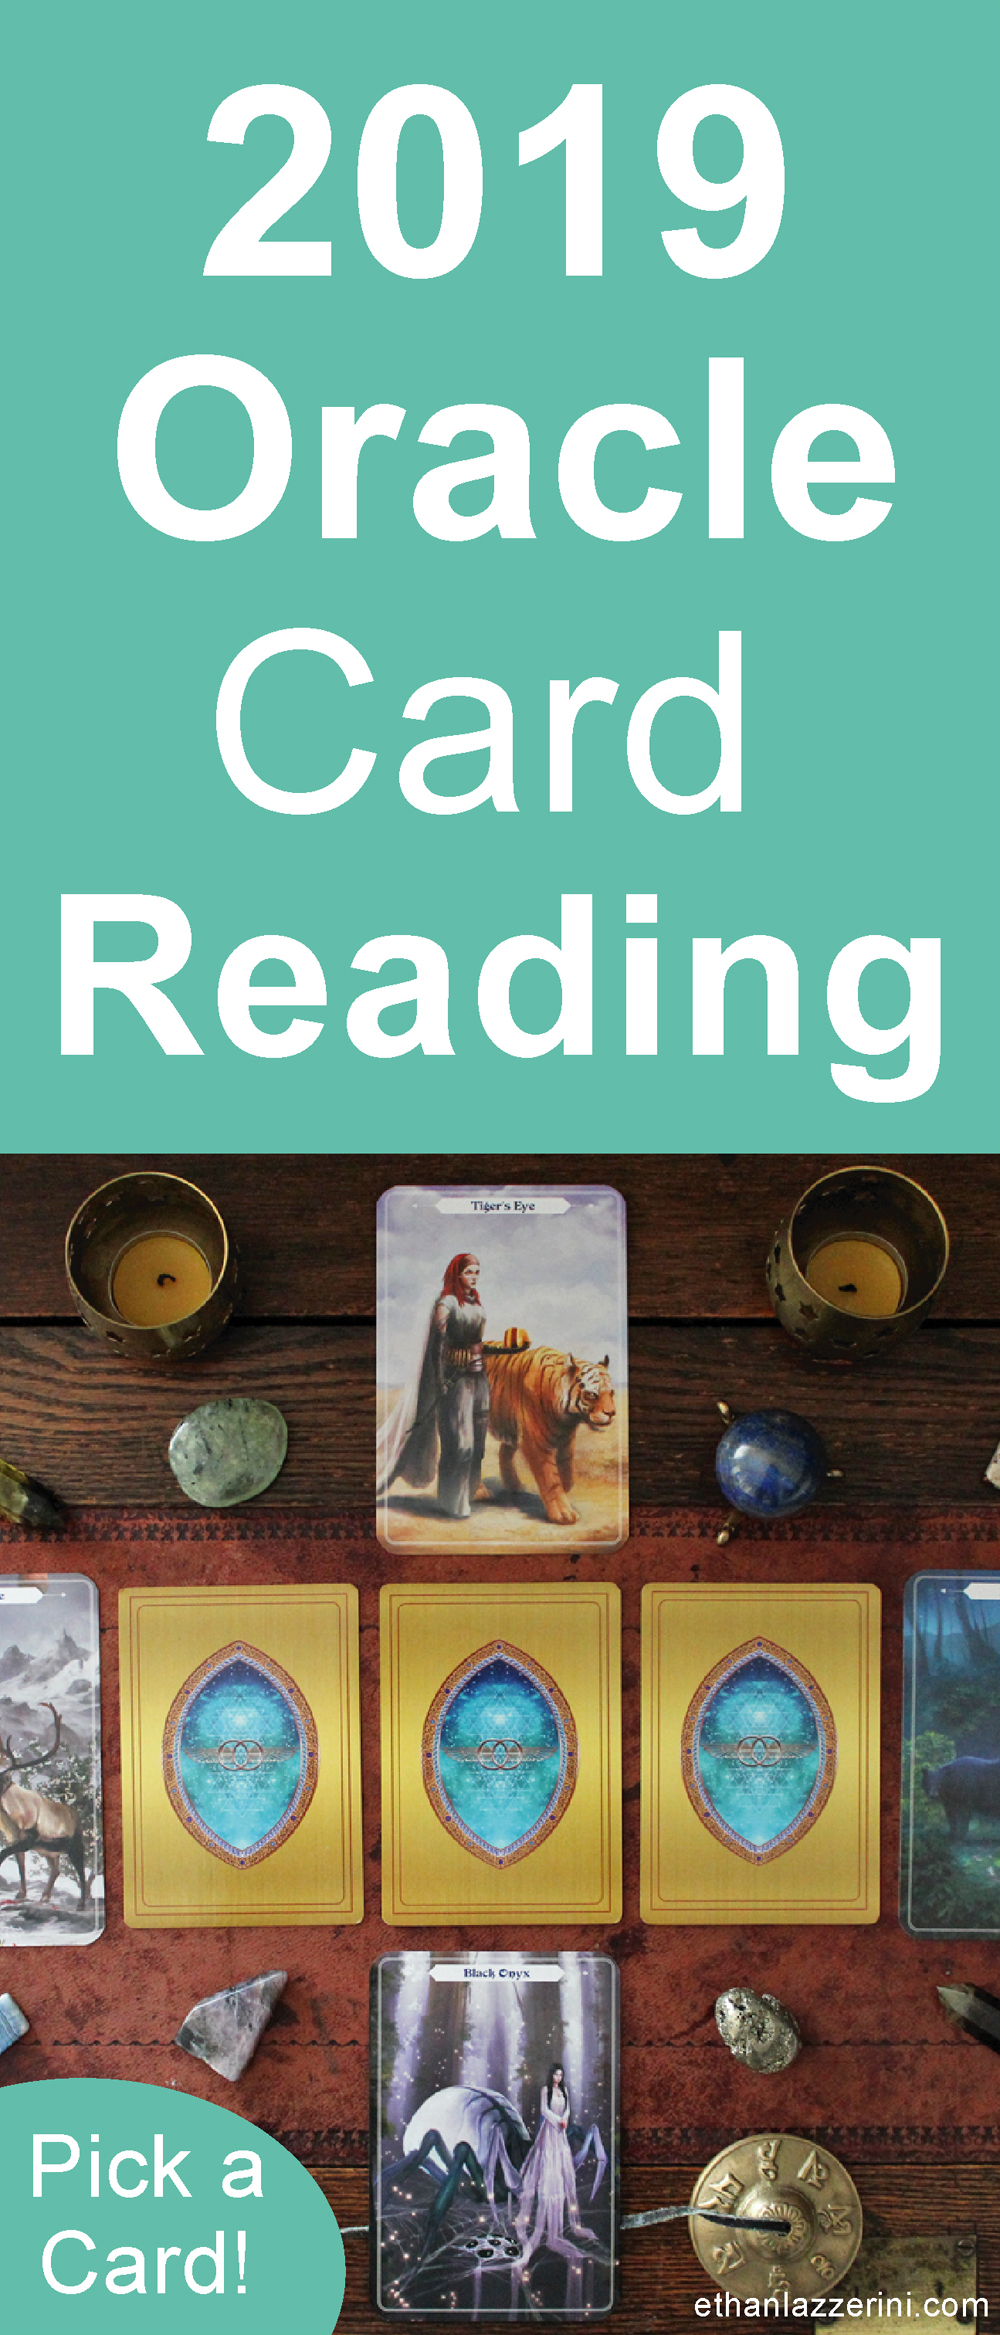 2019 oracle card reading